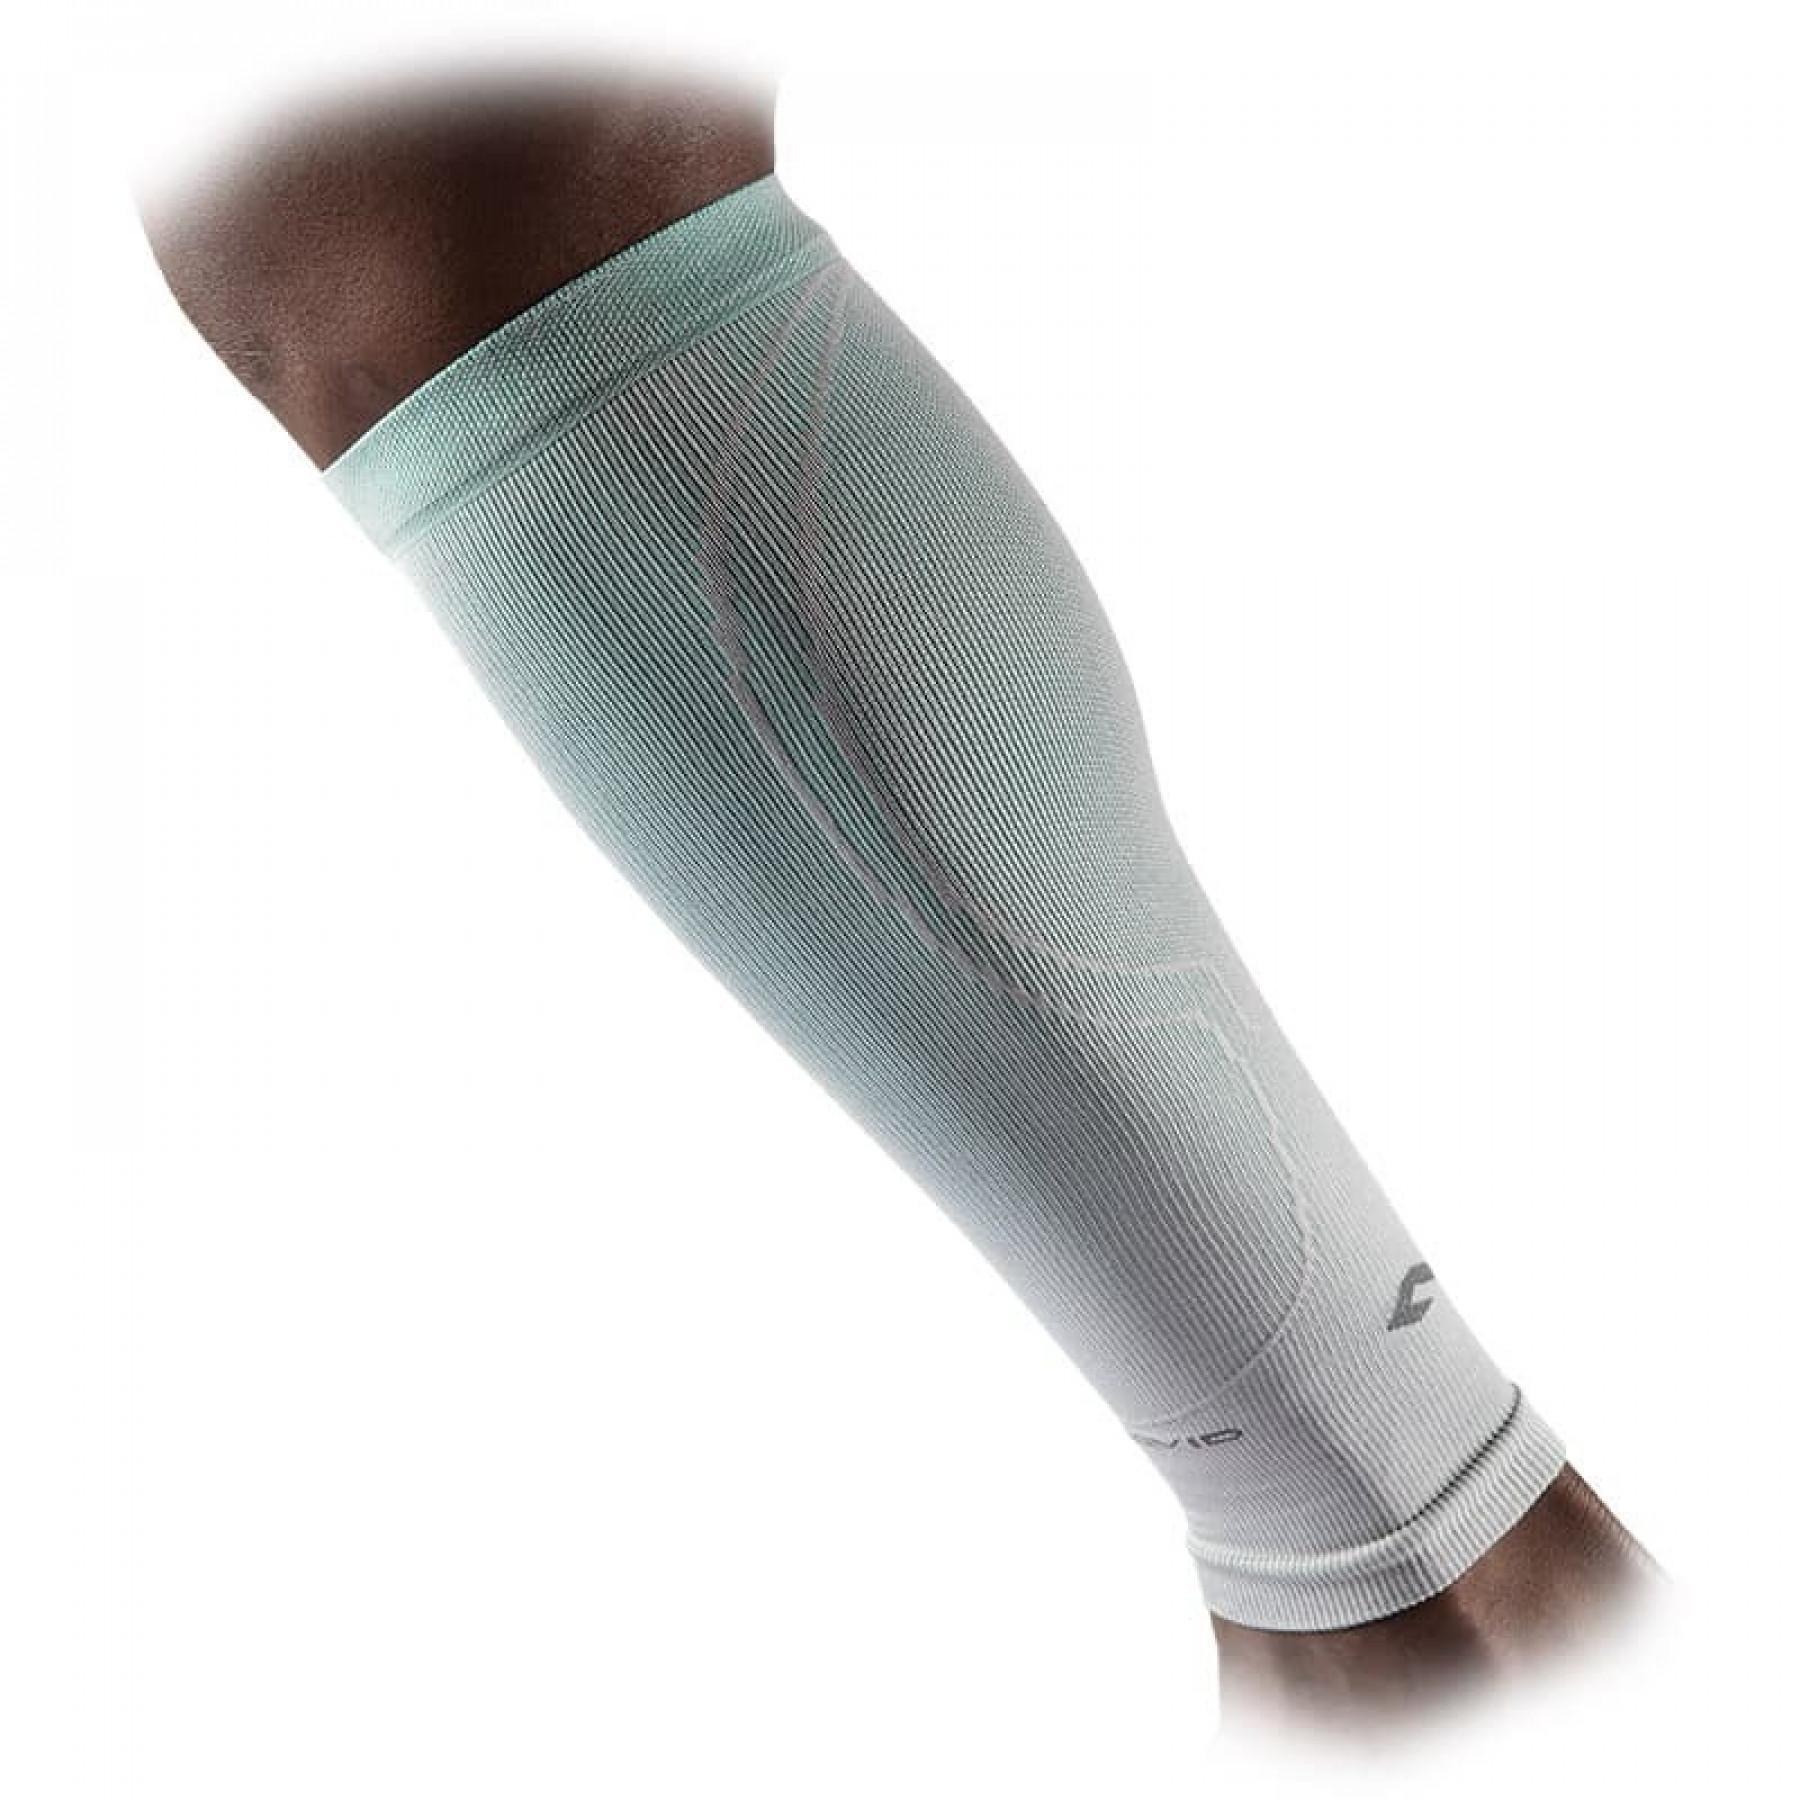 Leg compression sleeve McDavid ACTIVE - Arm sleeves - Protections -  Equipment